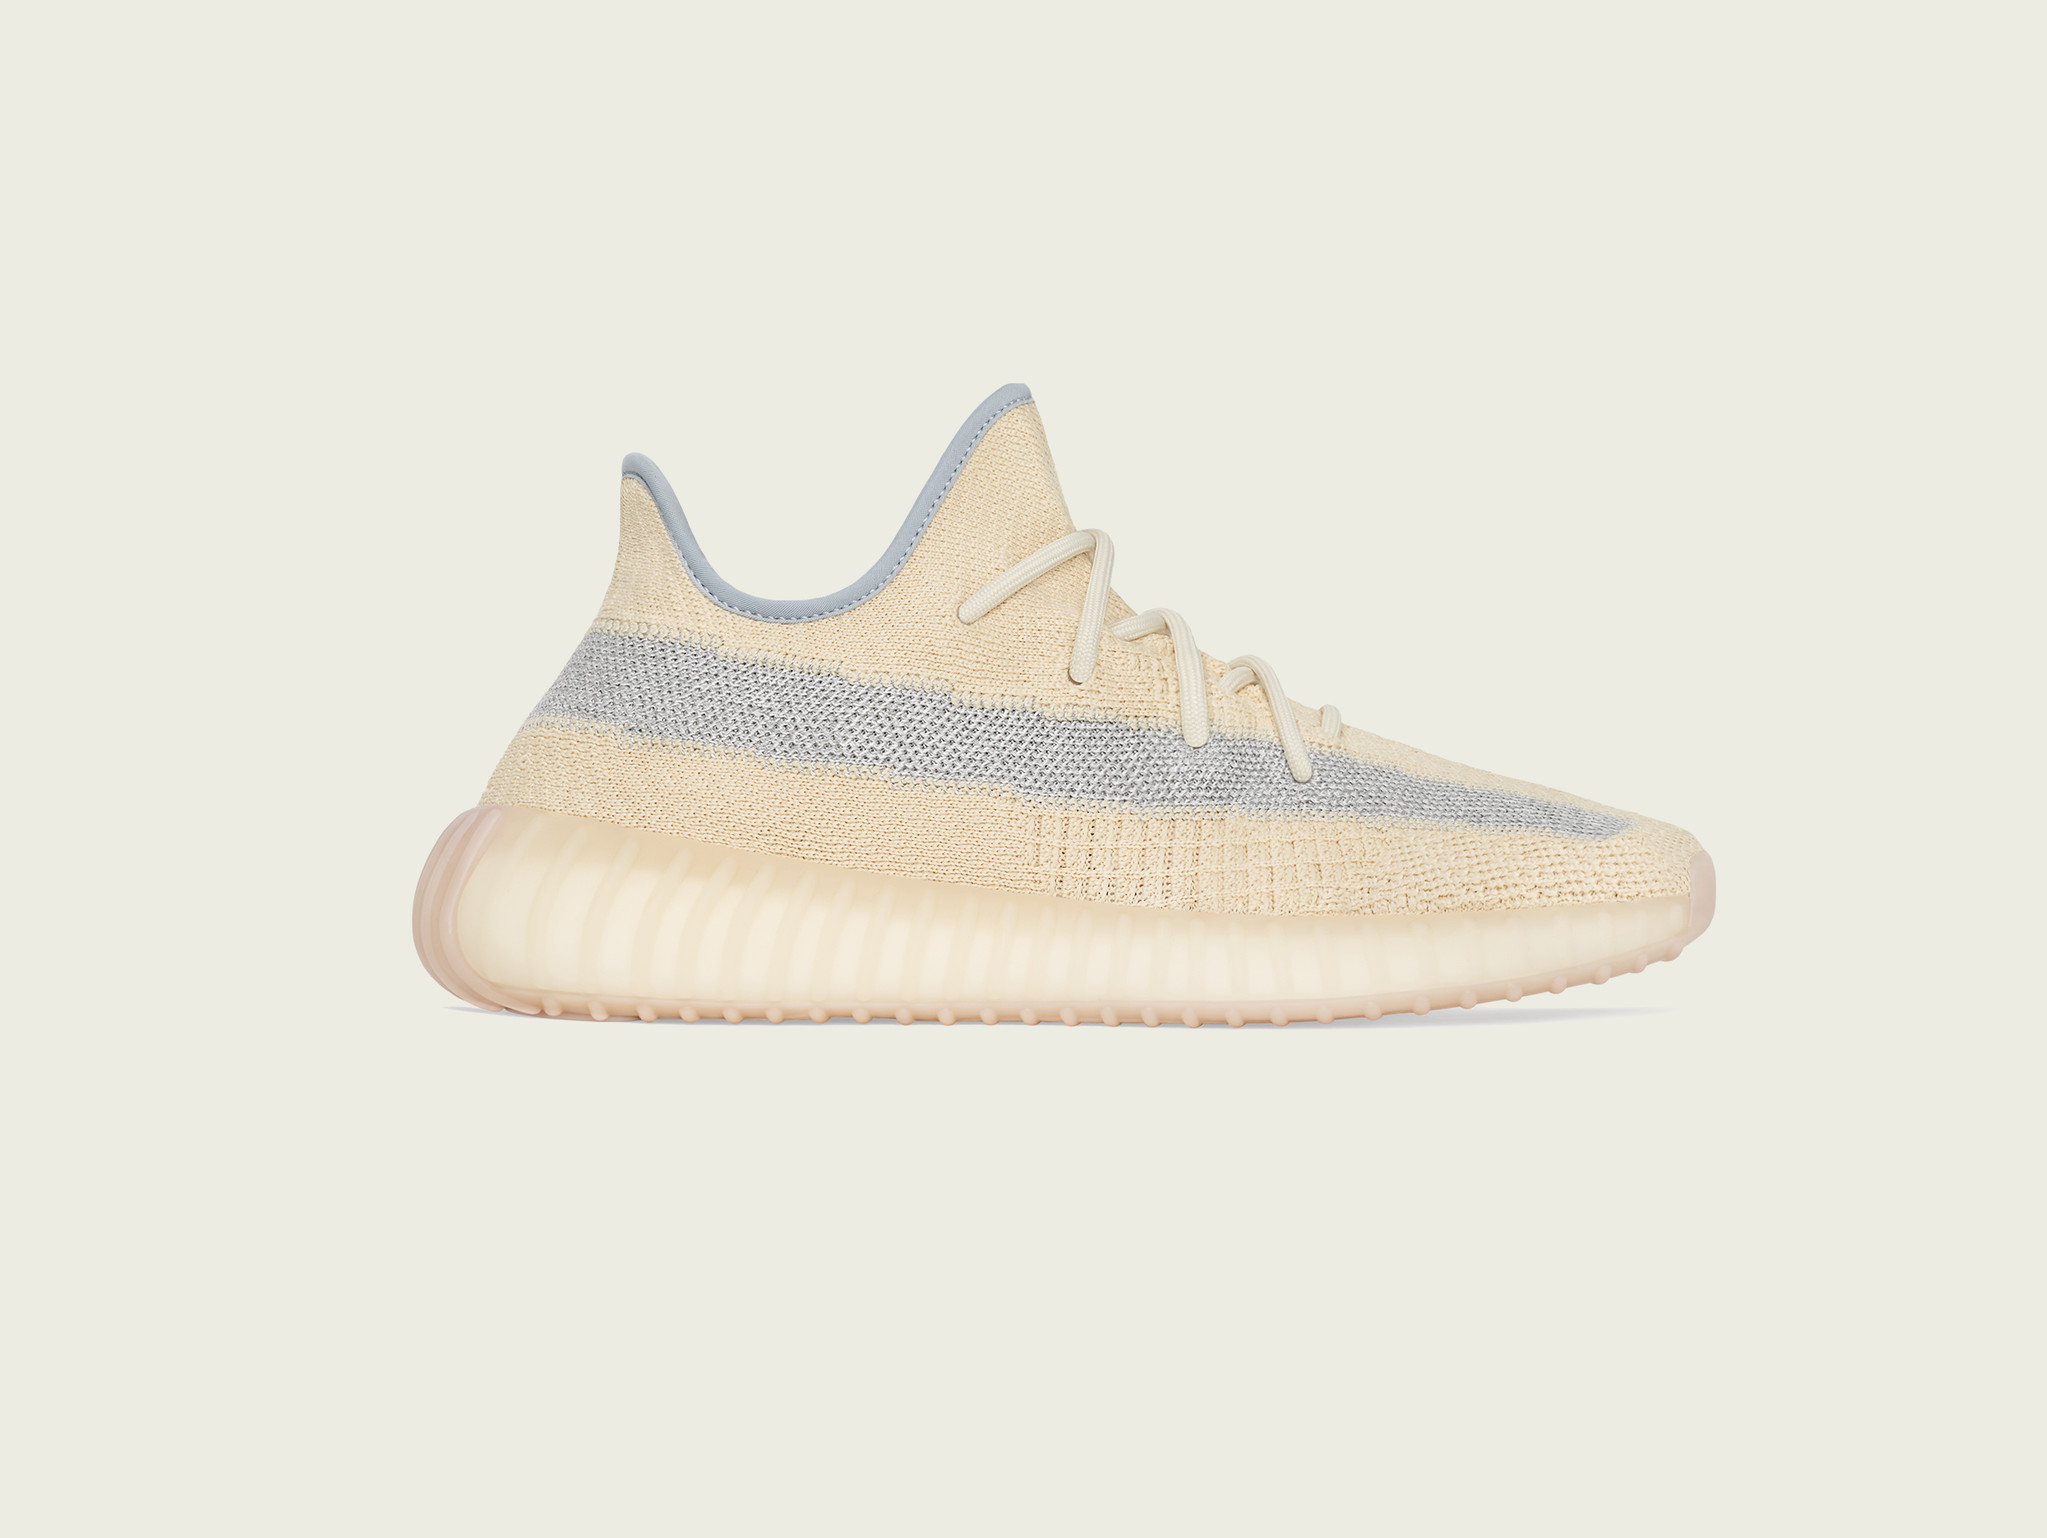 18.04.2020 - The adidas Yeezy 350 v2 “LINEN” release